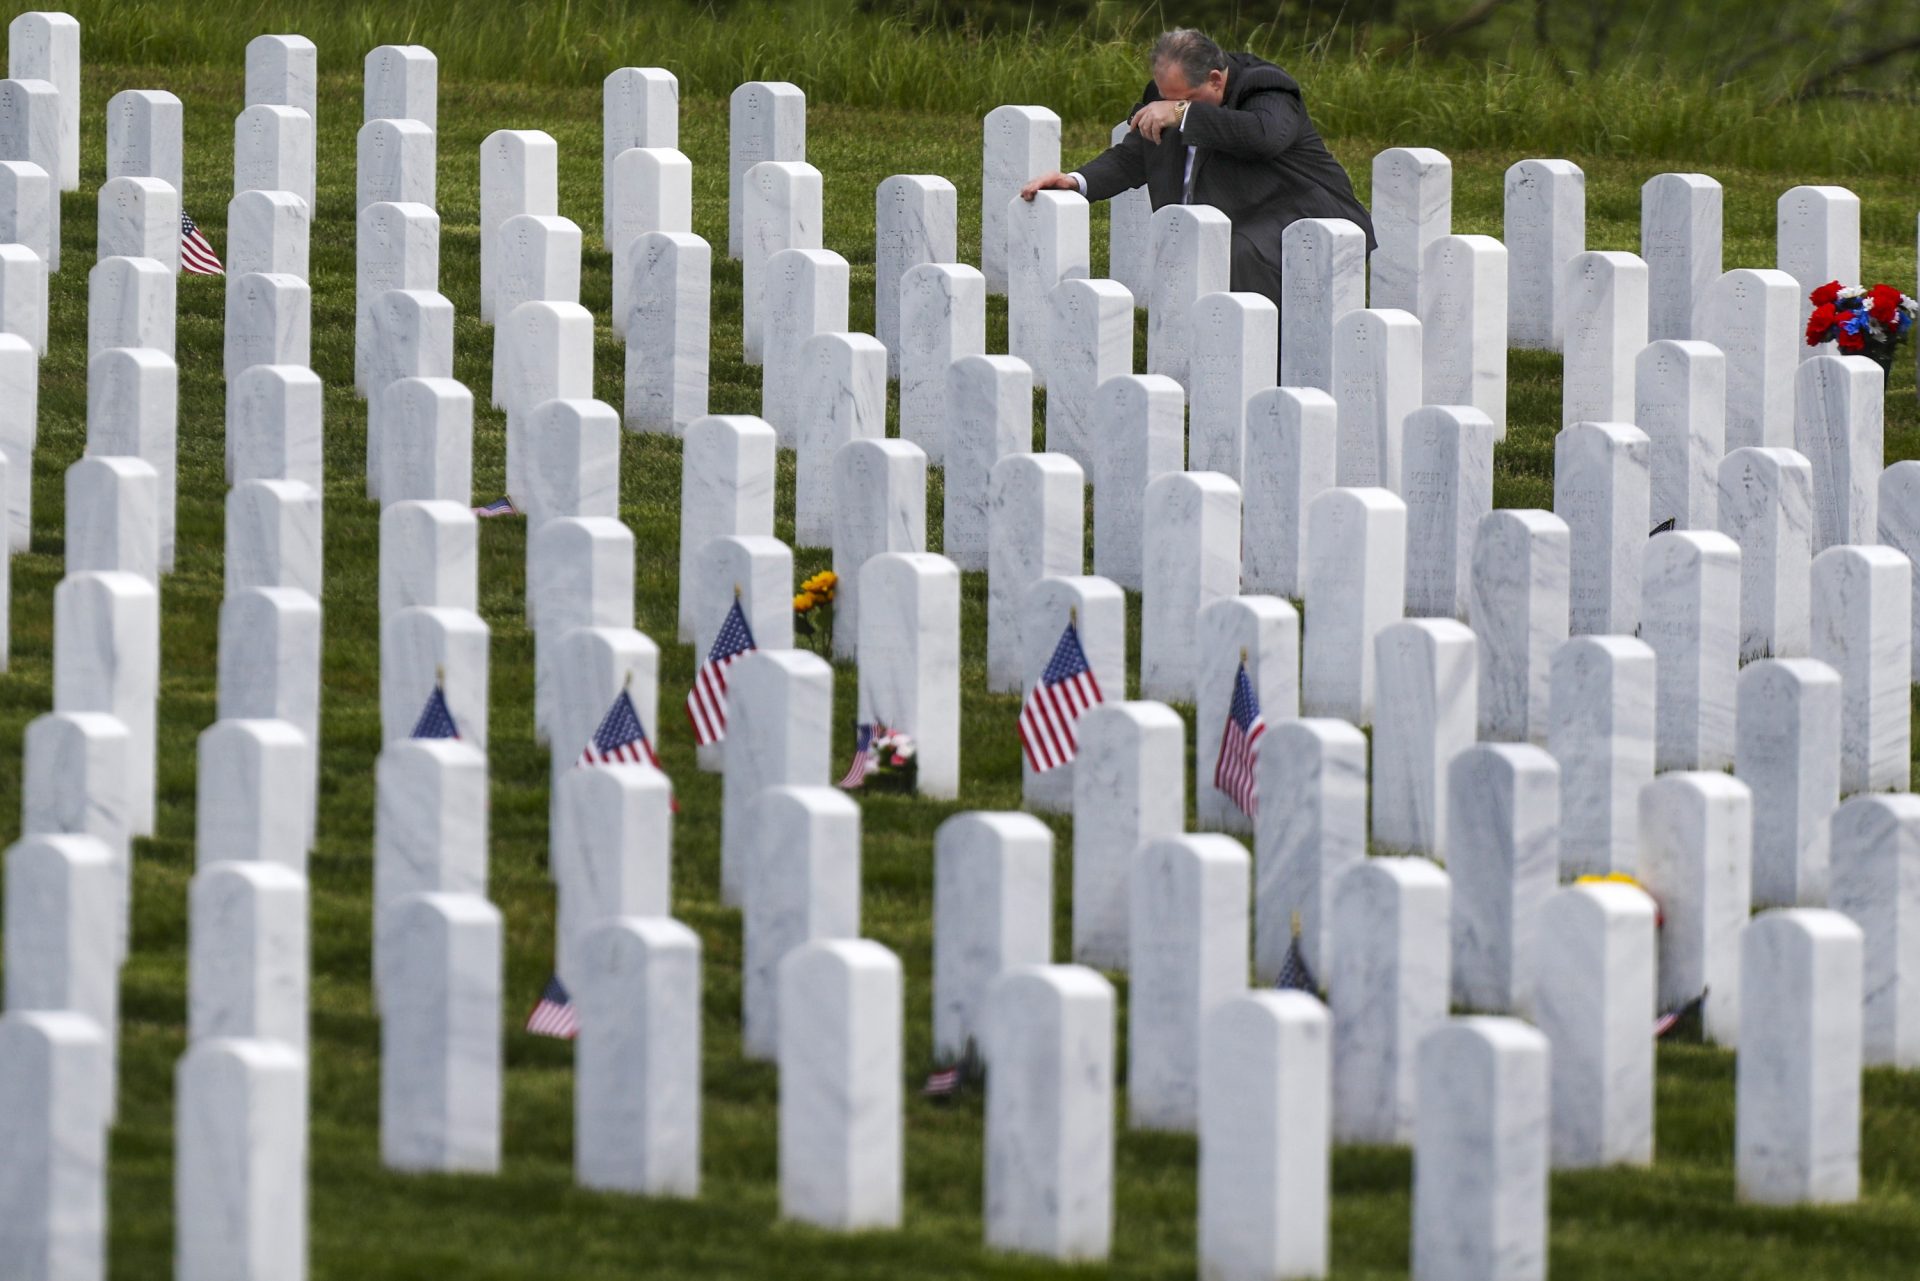 Raymond Piacquadio wipes his brow as he kneels at the grave of his mother during his visit to the Cemetery of the Alleghenies, a Veterans Administration National Cemetery, Saturday, May 23, 2020, on the Memorial Day Holiday weekend in Bridgeville, Pa.